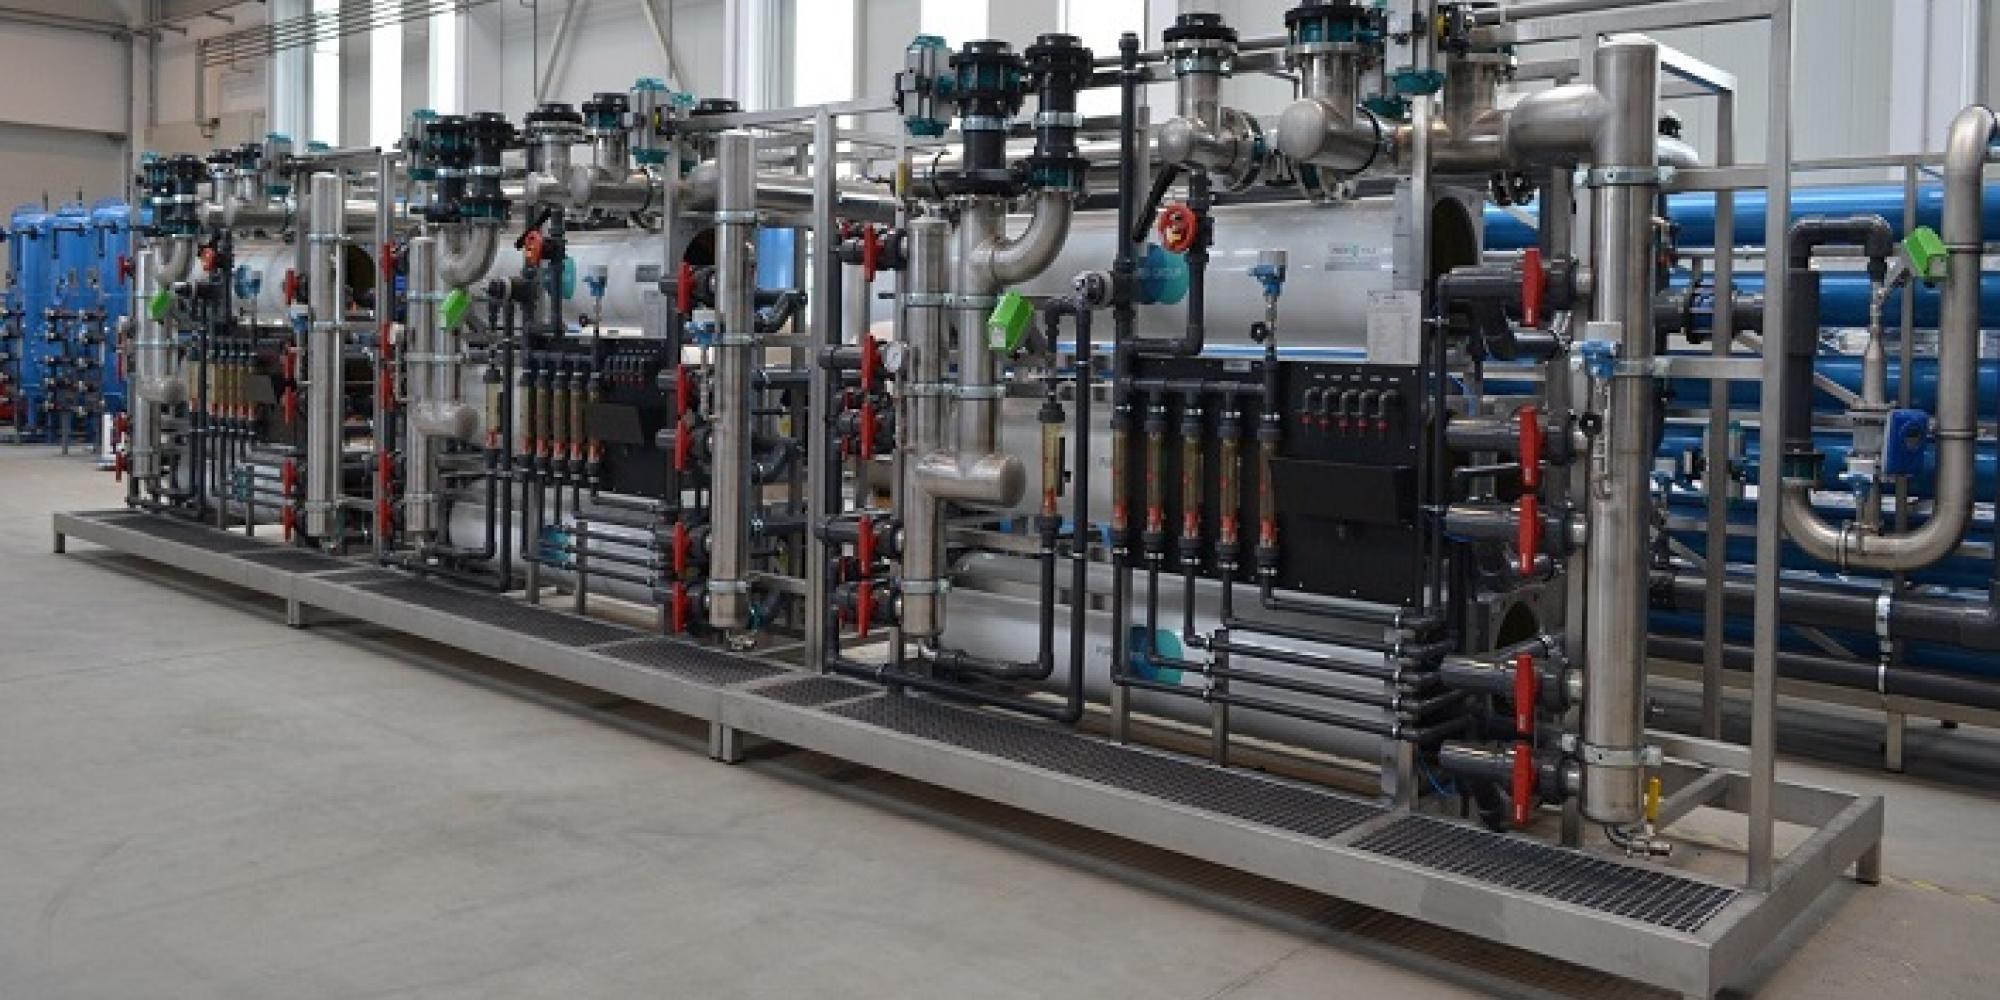 Desalination system for a chemical factory in Hungary